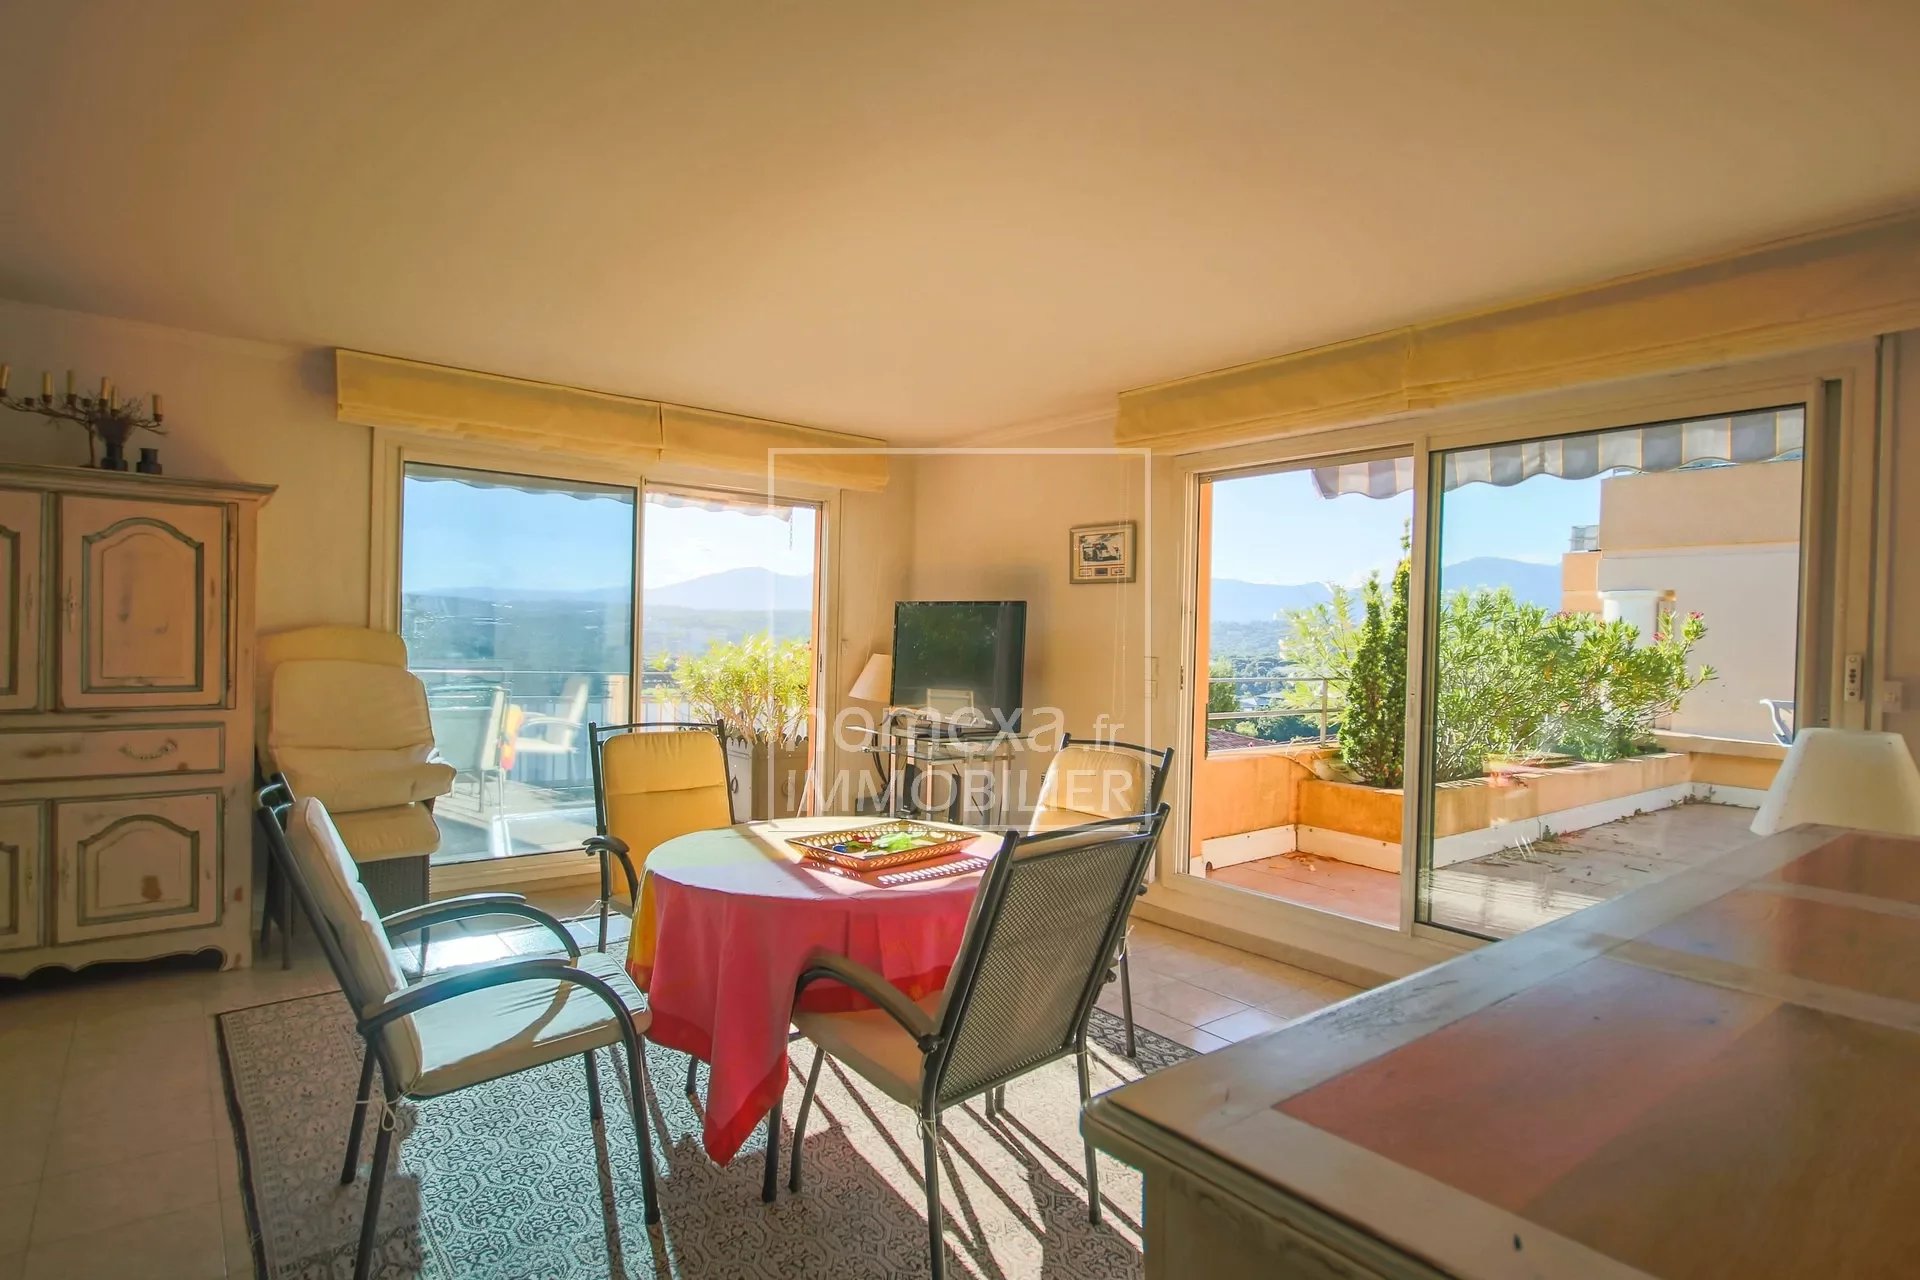 Apartment for sale in Biot Saint-Philippe Greenside : living-room with panoramic view